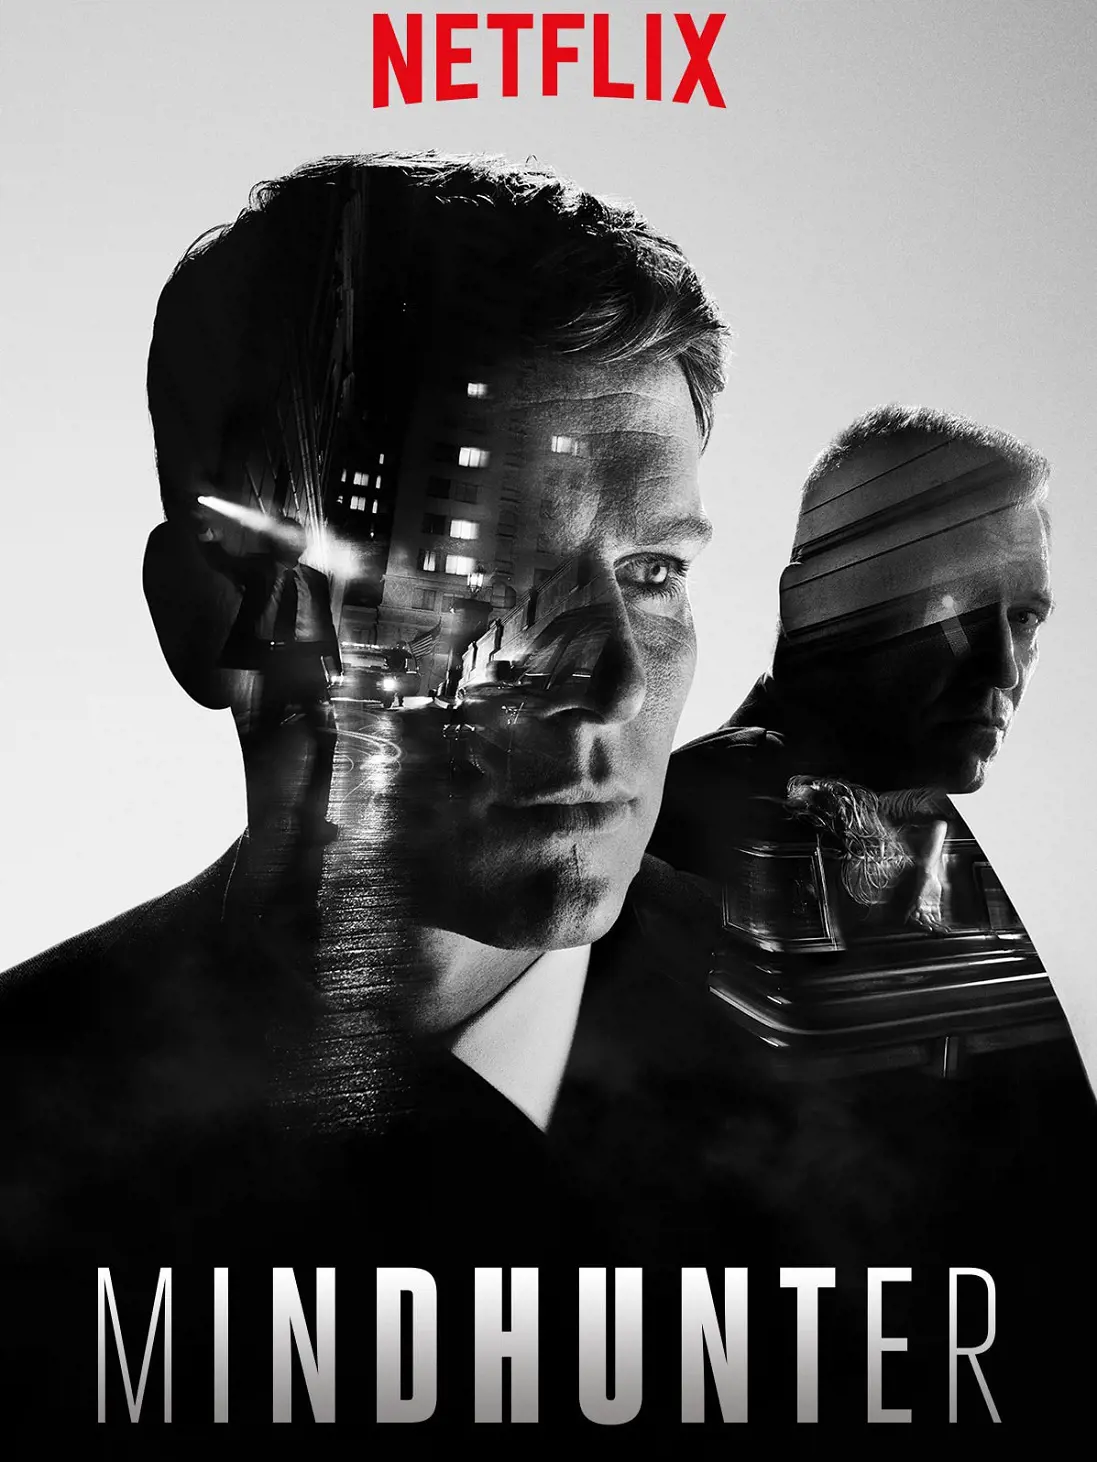 Mindhunters launched on October 13, 2017, and have two seasons. The show casts Jonathan Groff, Holt McCallany, Anna Torv, and more